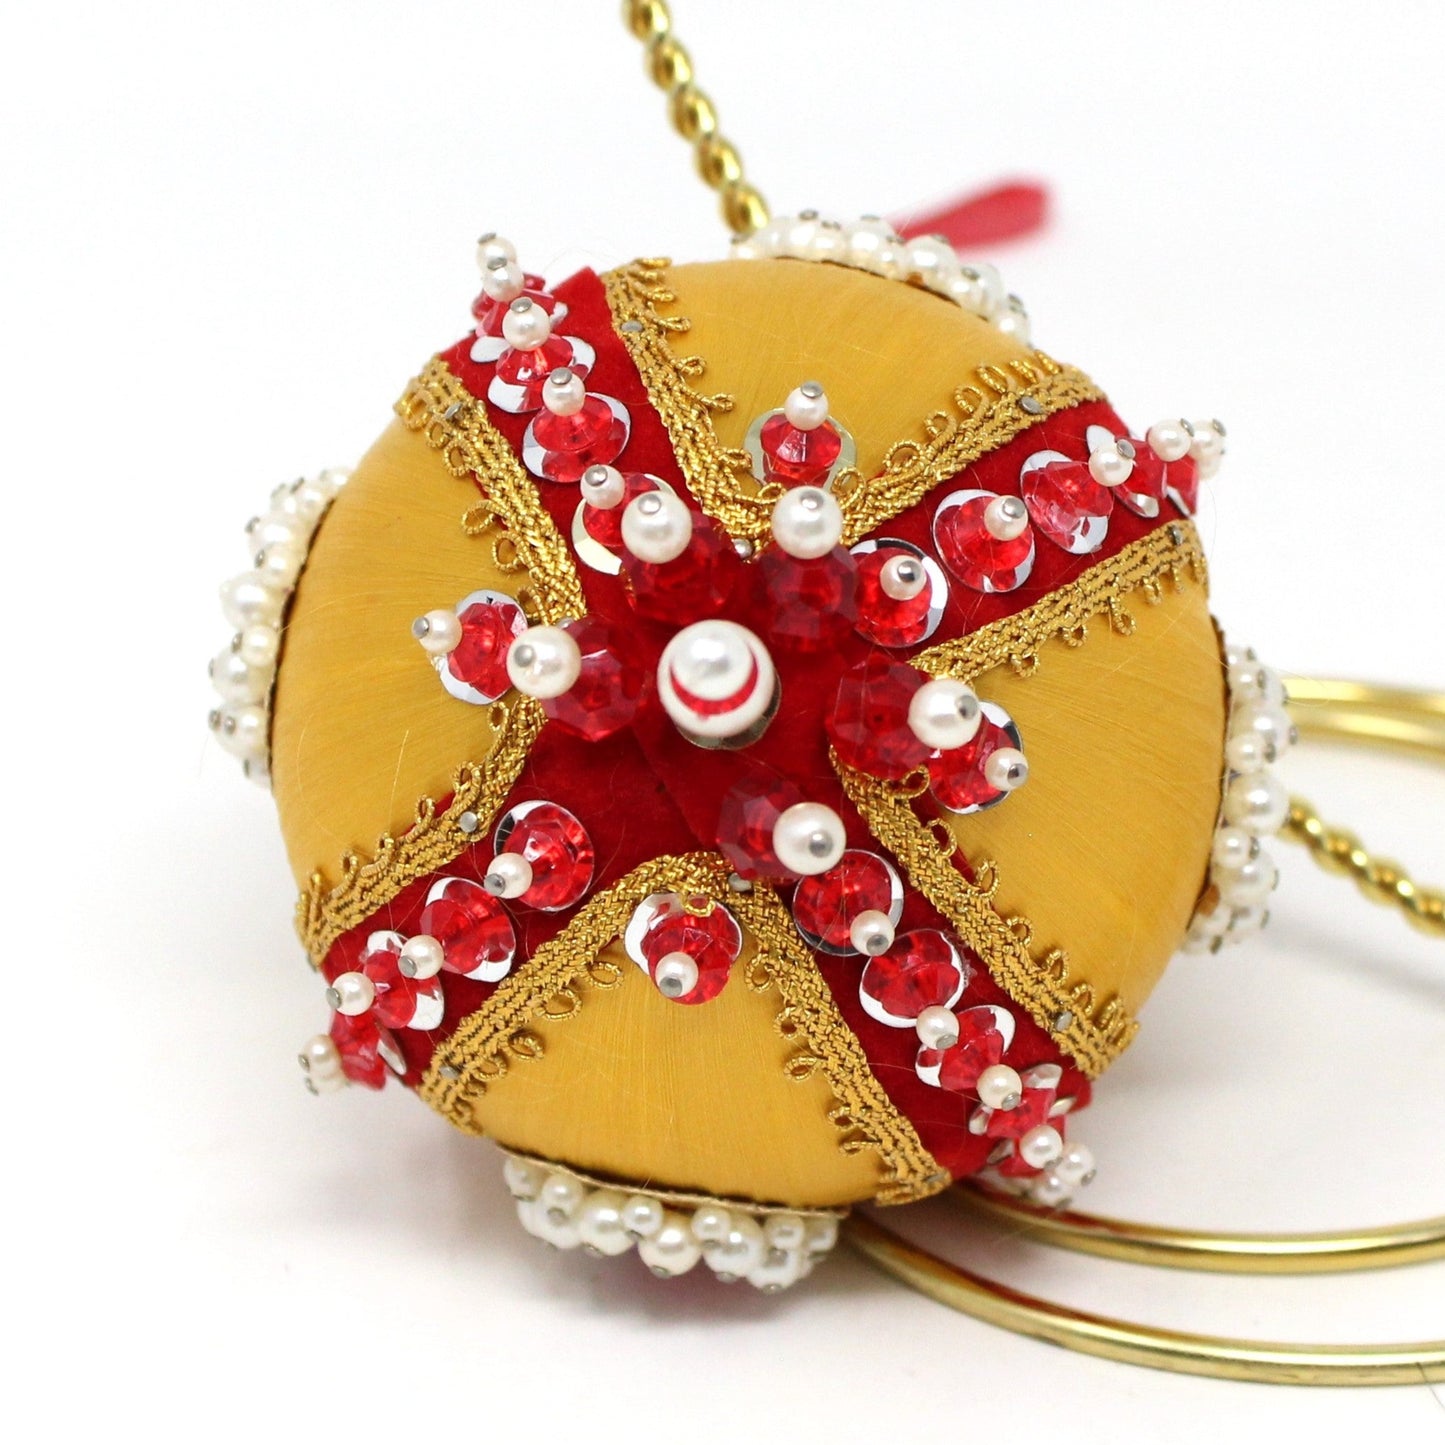 Ornament, Satin Beaded Ball, Gold & Red, Hand Made, Vintage